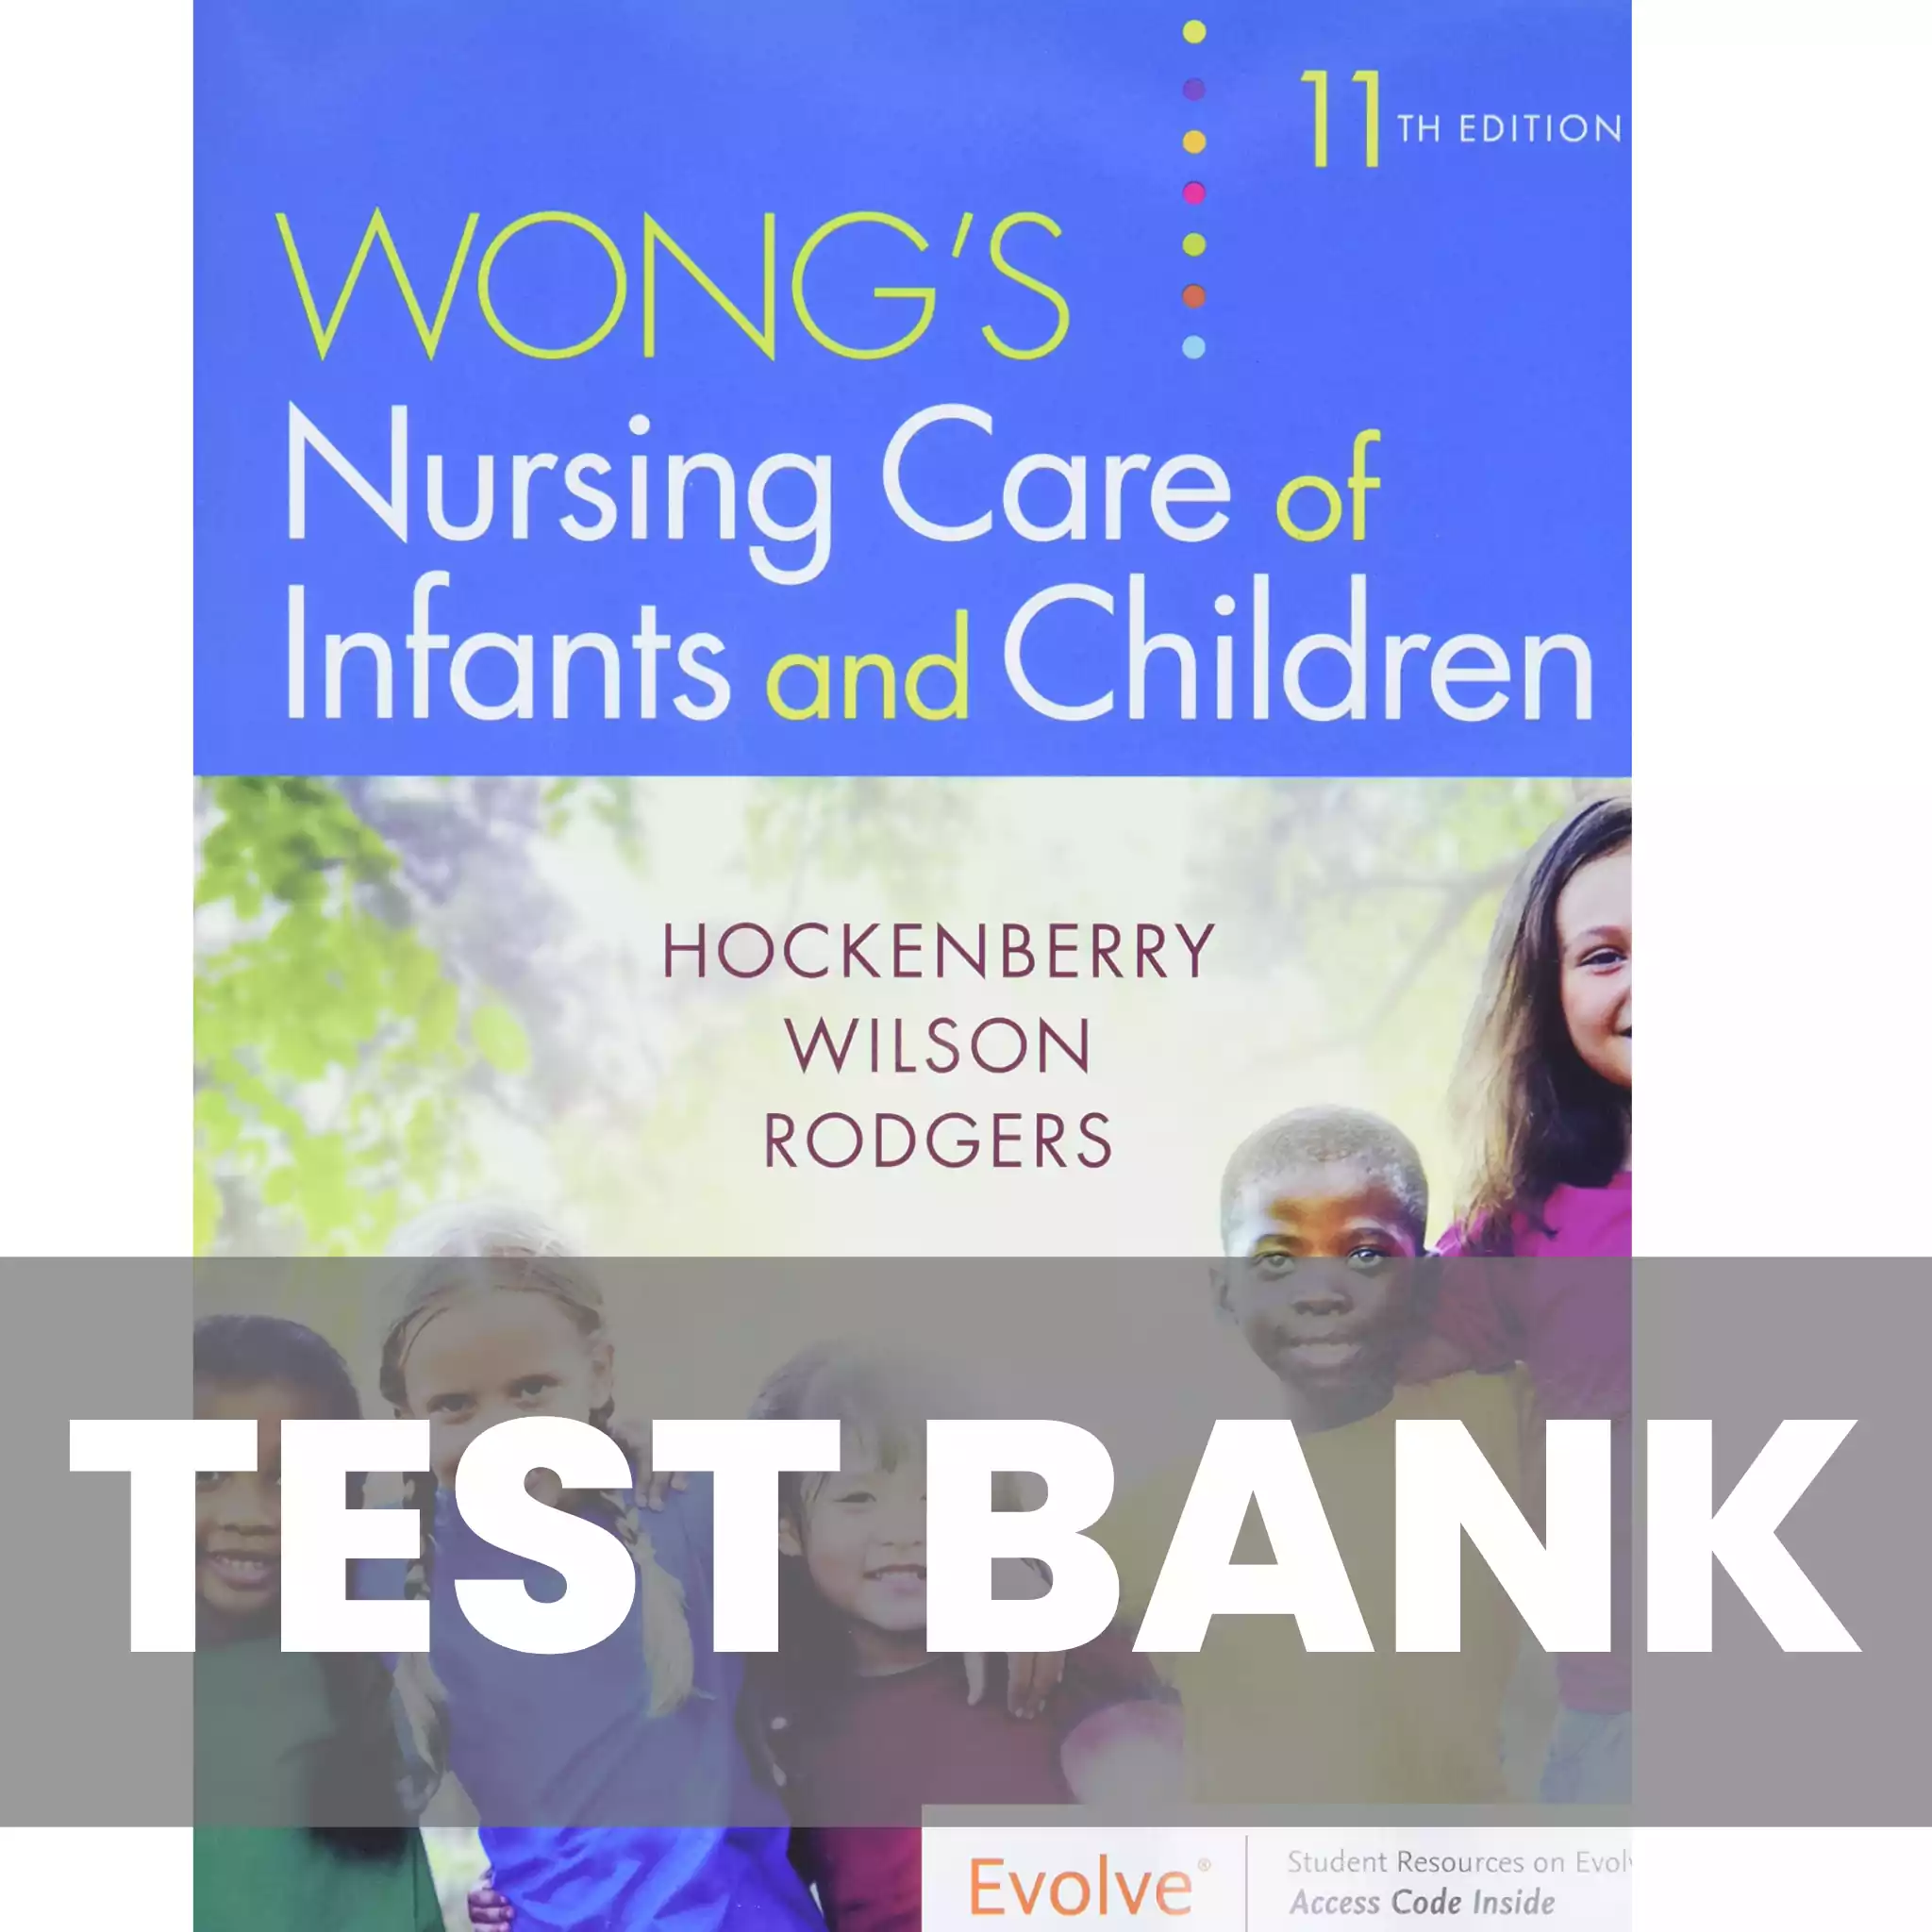 Study Guide for Wong's Essentials of Pediatric N: 11th edition